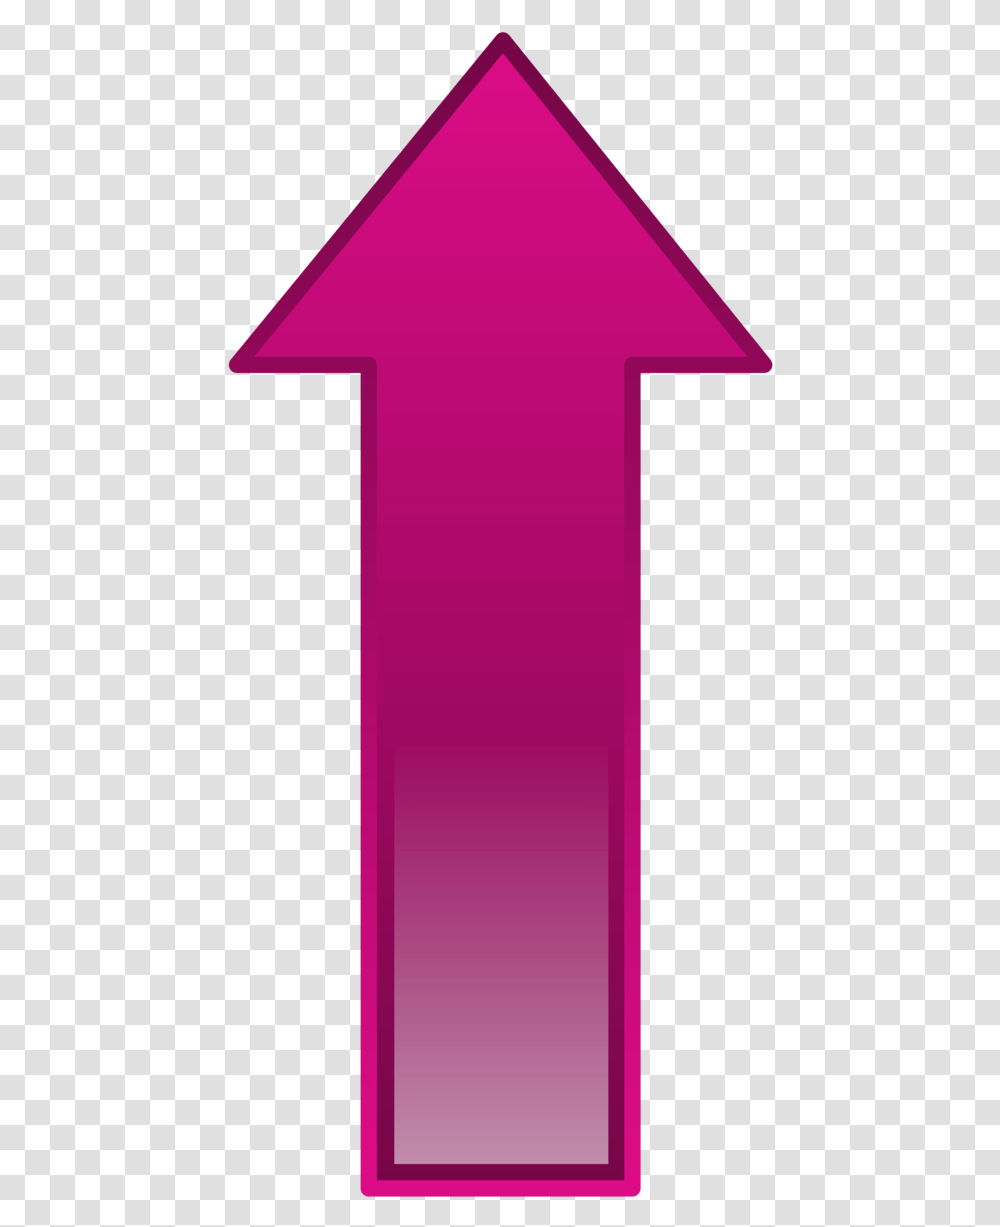 Arrow Pointing Up Gif Pink Arrow Pointing Up, Number, Alphabet Transparent Png